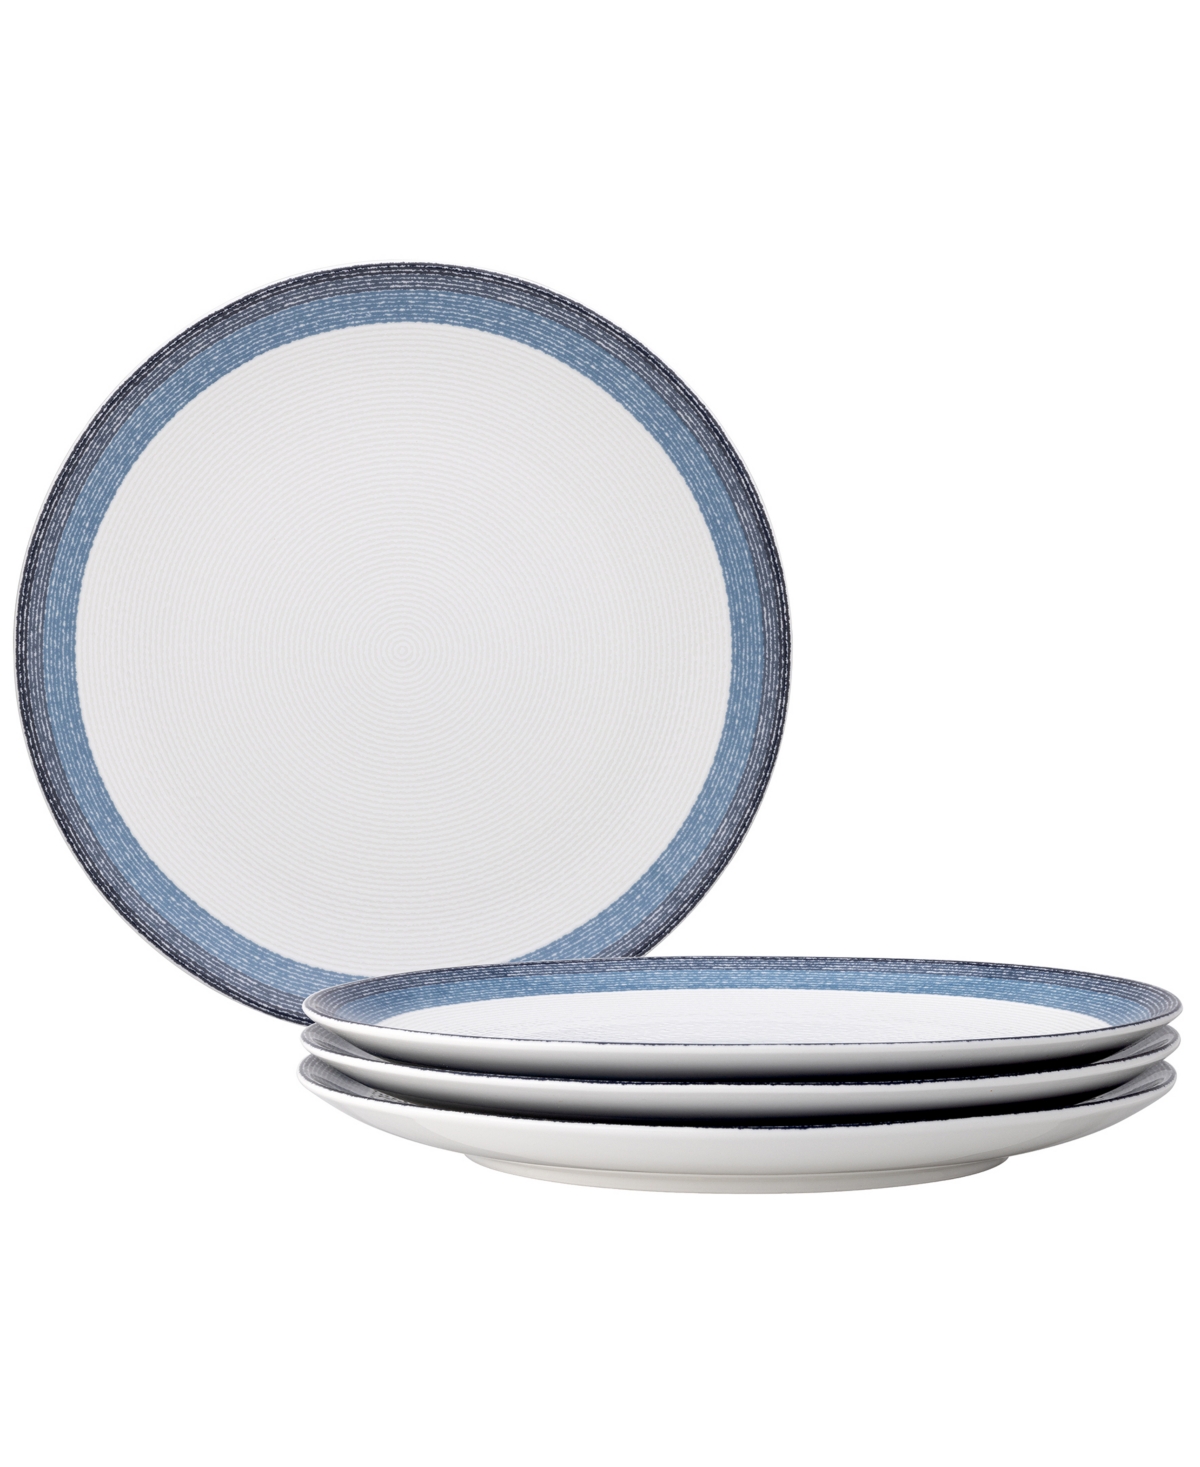 Colorscapes Layers Coupe Dinner Plate Set/4, 11" - Navy